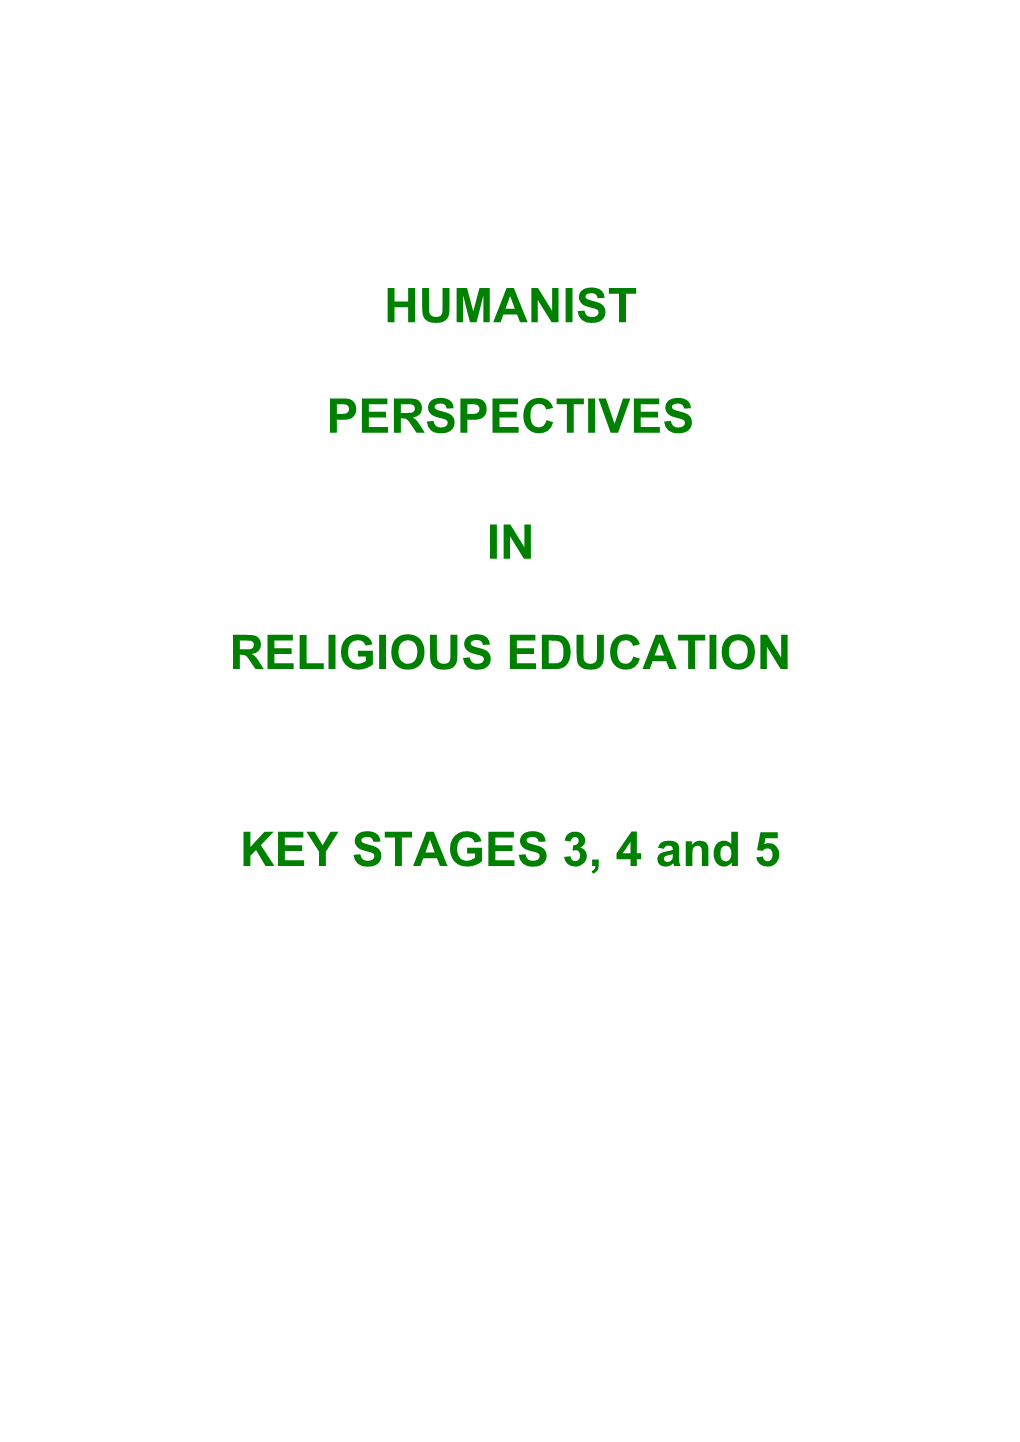 Humanist Perspectives in Religious Education Key